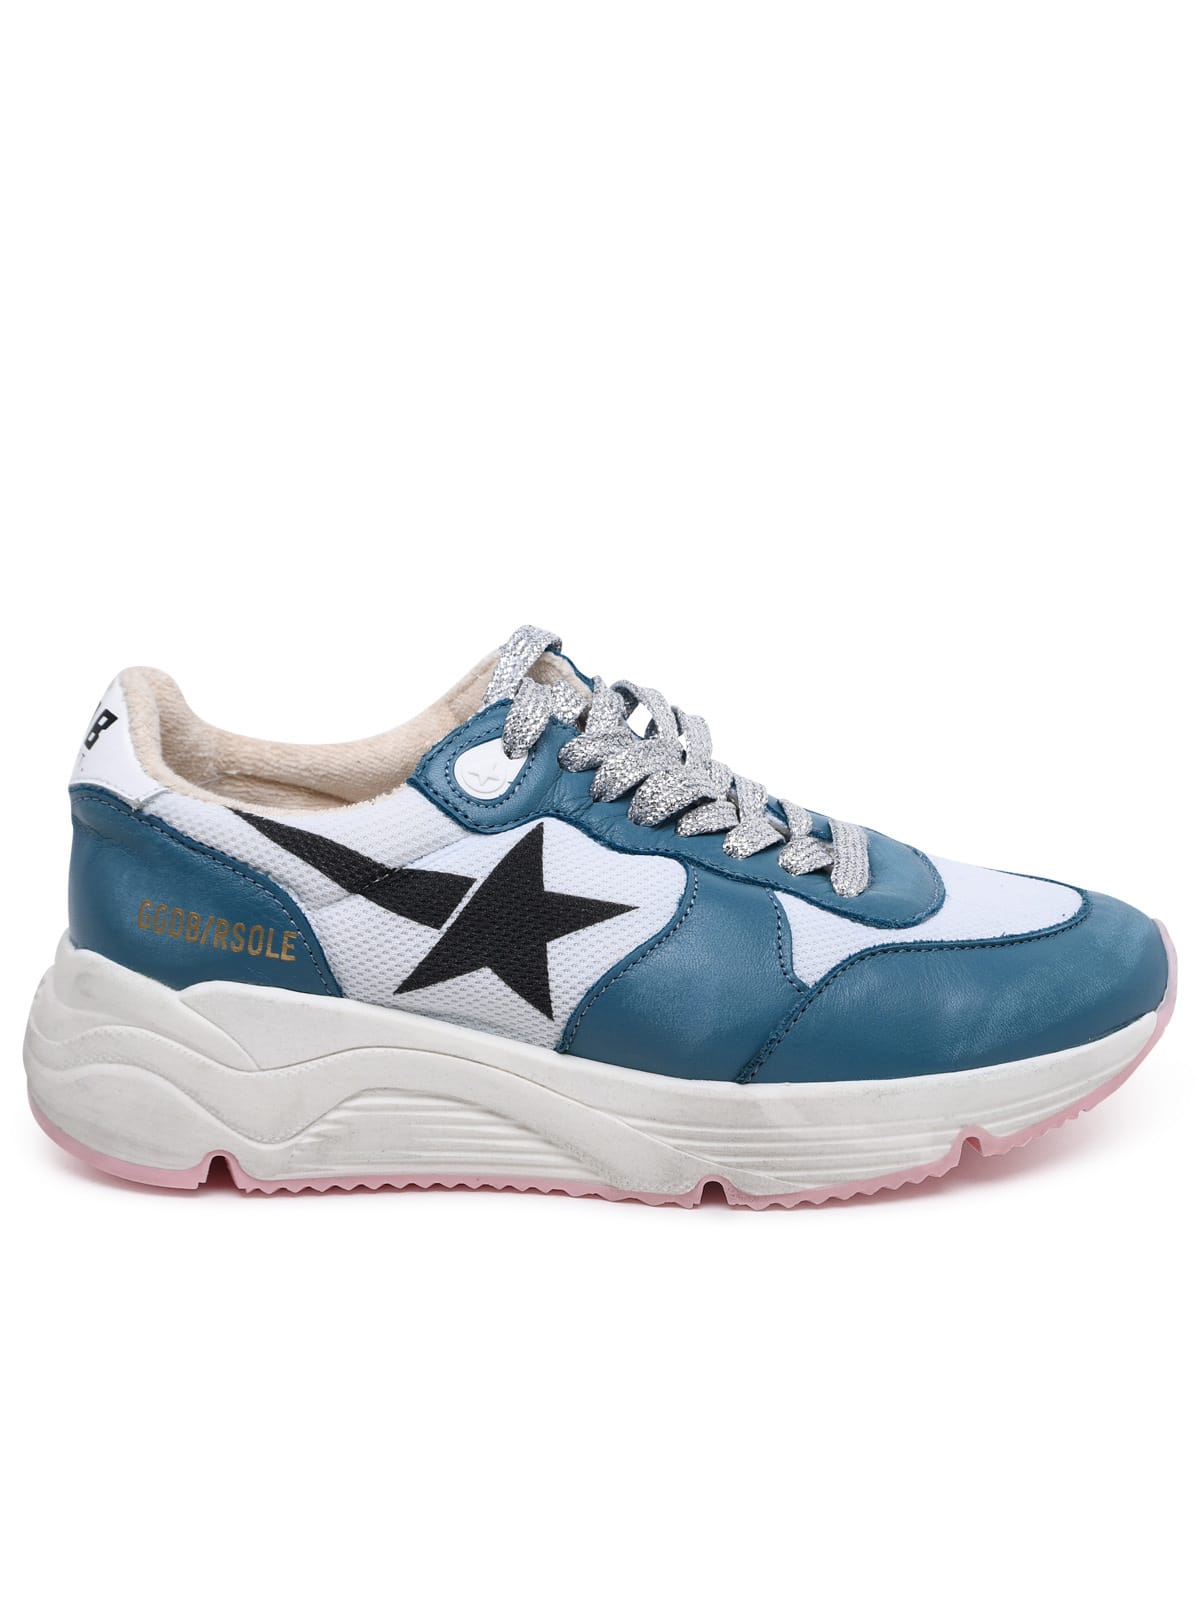 GOLDEN GOOSE RUNNING SOLE TWO-COLOR LEATHER BLEND SNEAKERS